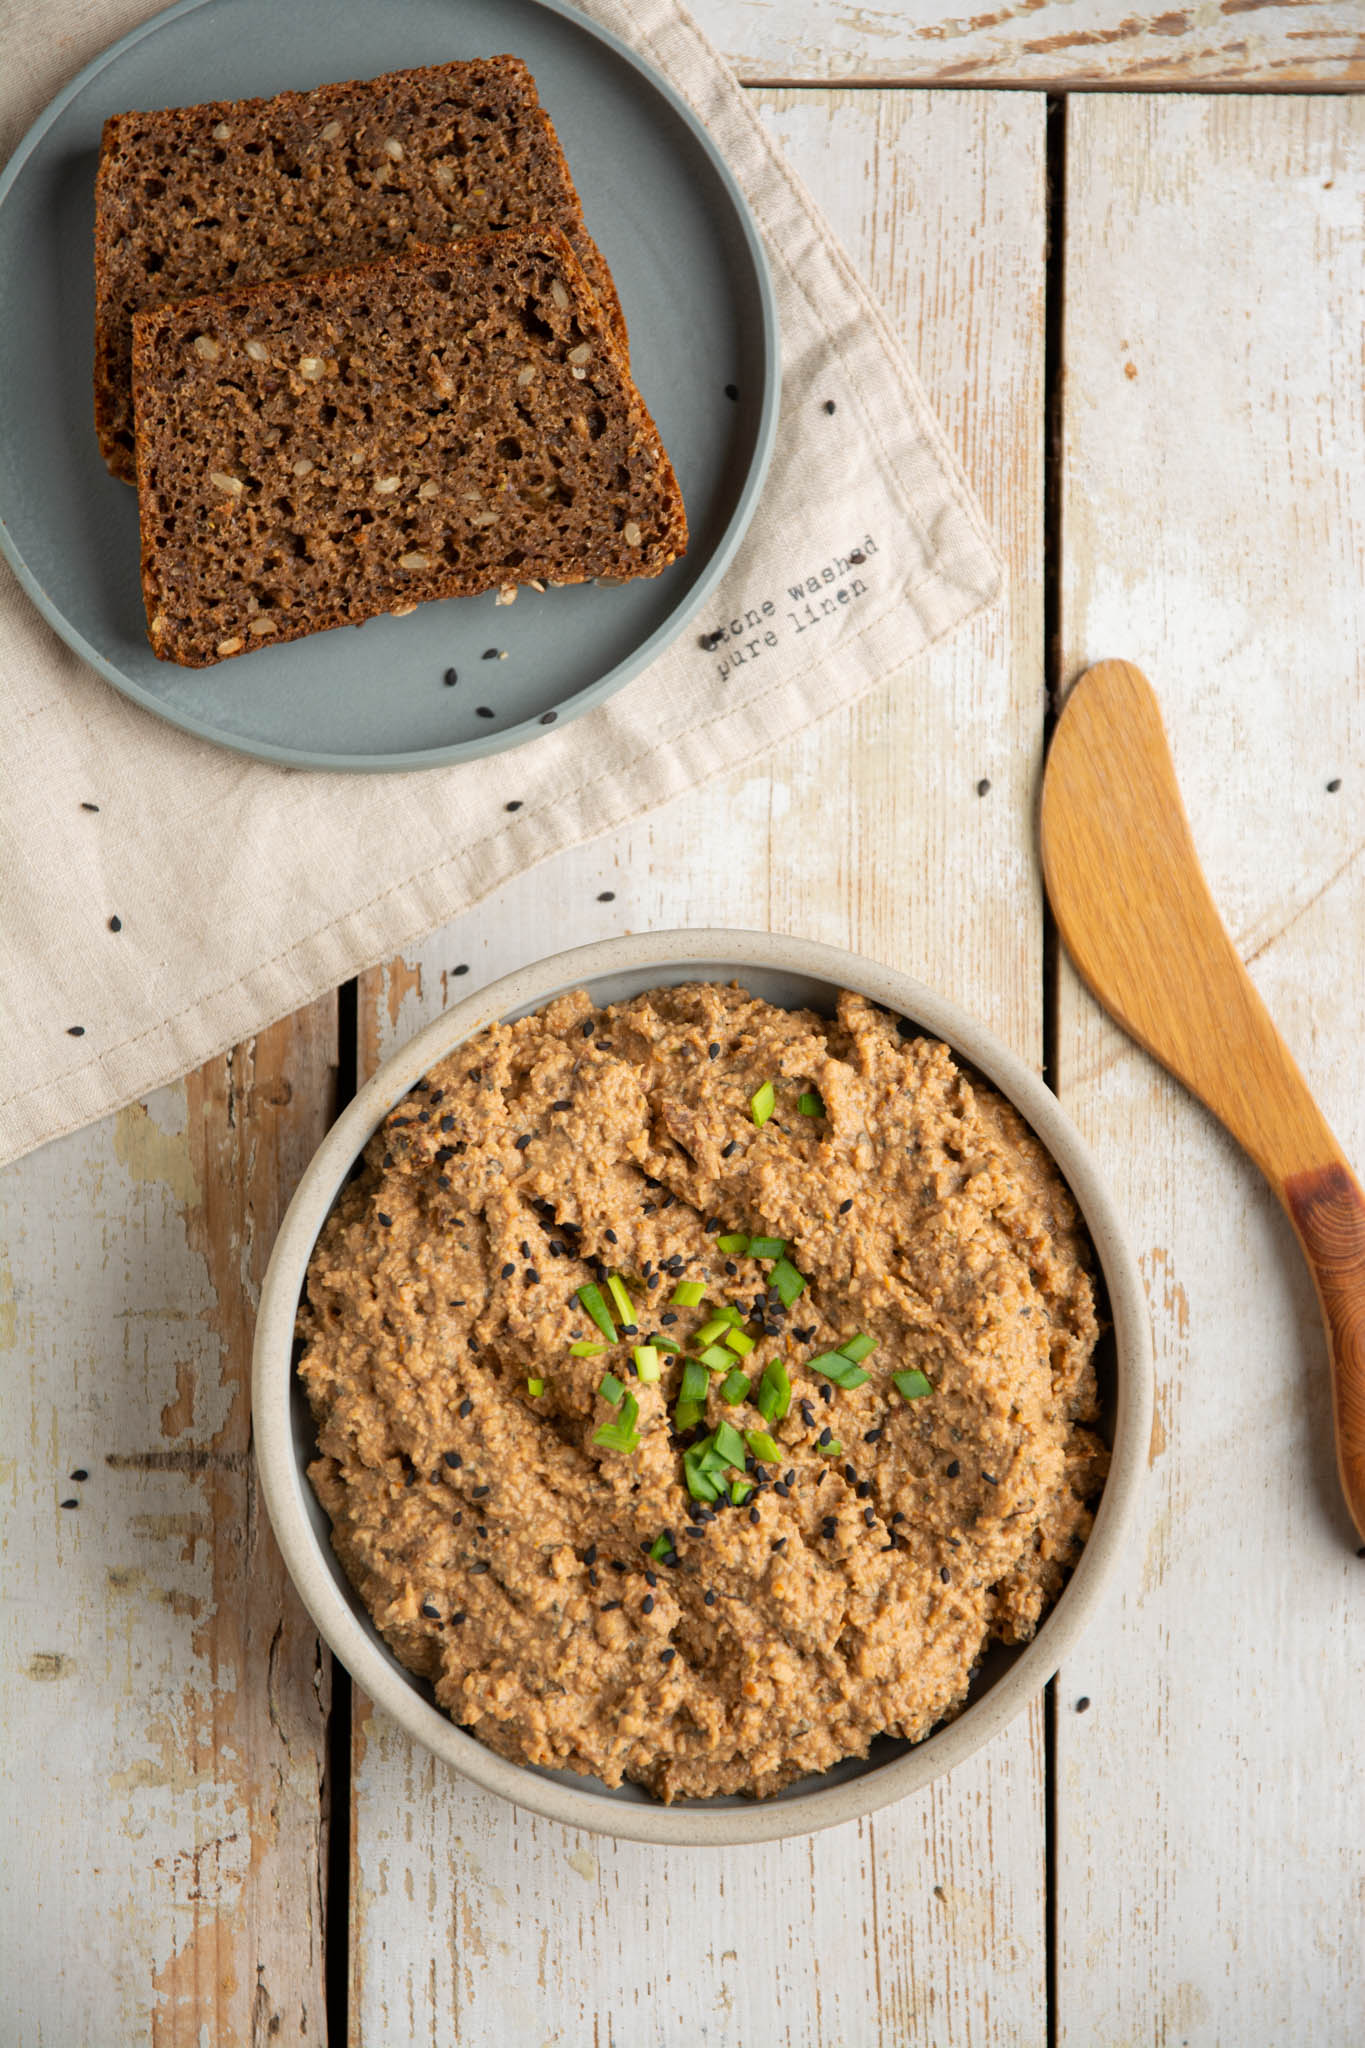 Delicious and easy low glycemic soybean and tofu hummus recipe with tahini. Enjoy the divine Mediterranean flavours of sun-dried tomatoes and dried basil.